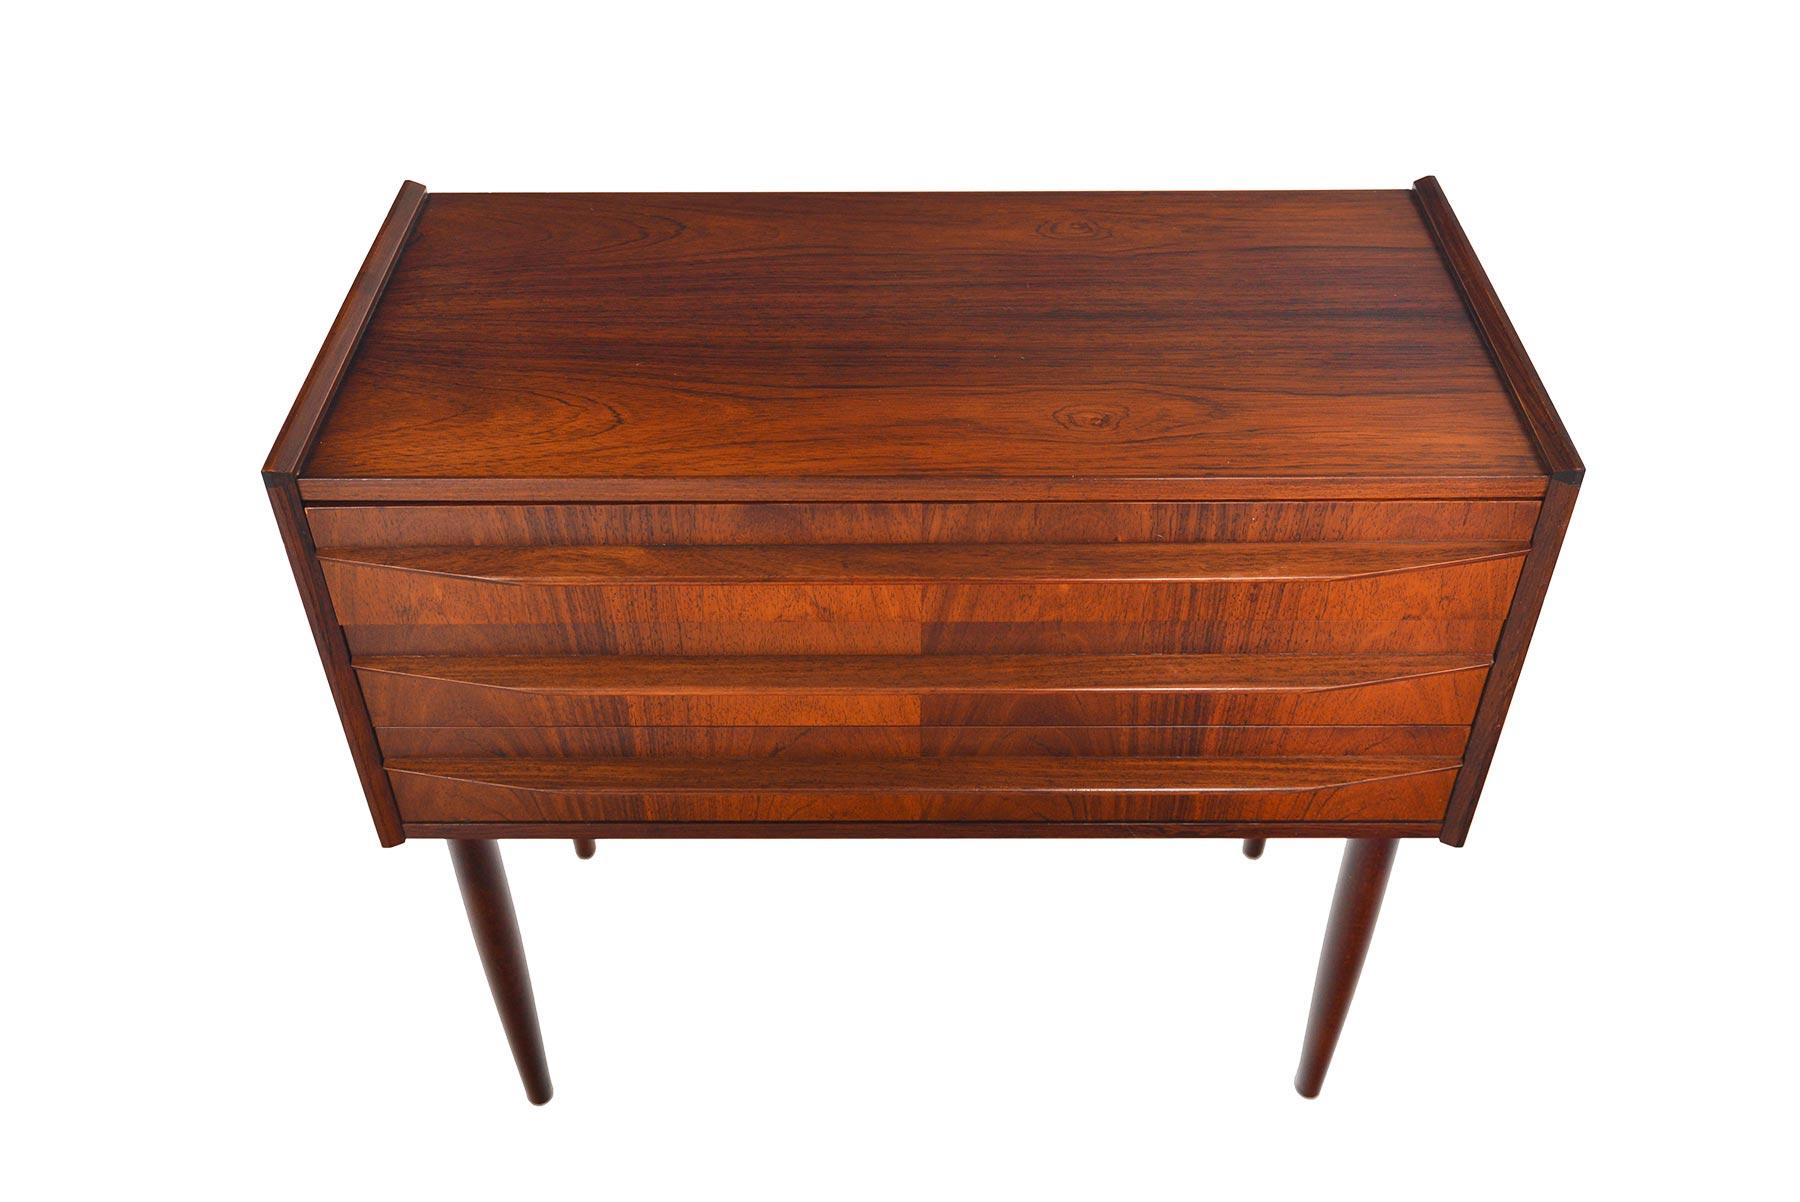 This Danish modern midcentury rosewood chest will make a wonderful addition to any modern bedroom or entryway. Three drawers with carved full profile pulls provide an excellent amount of storage. Case sits upon spindle legs. In excellent original